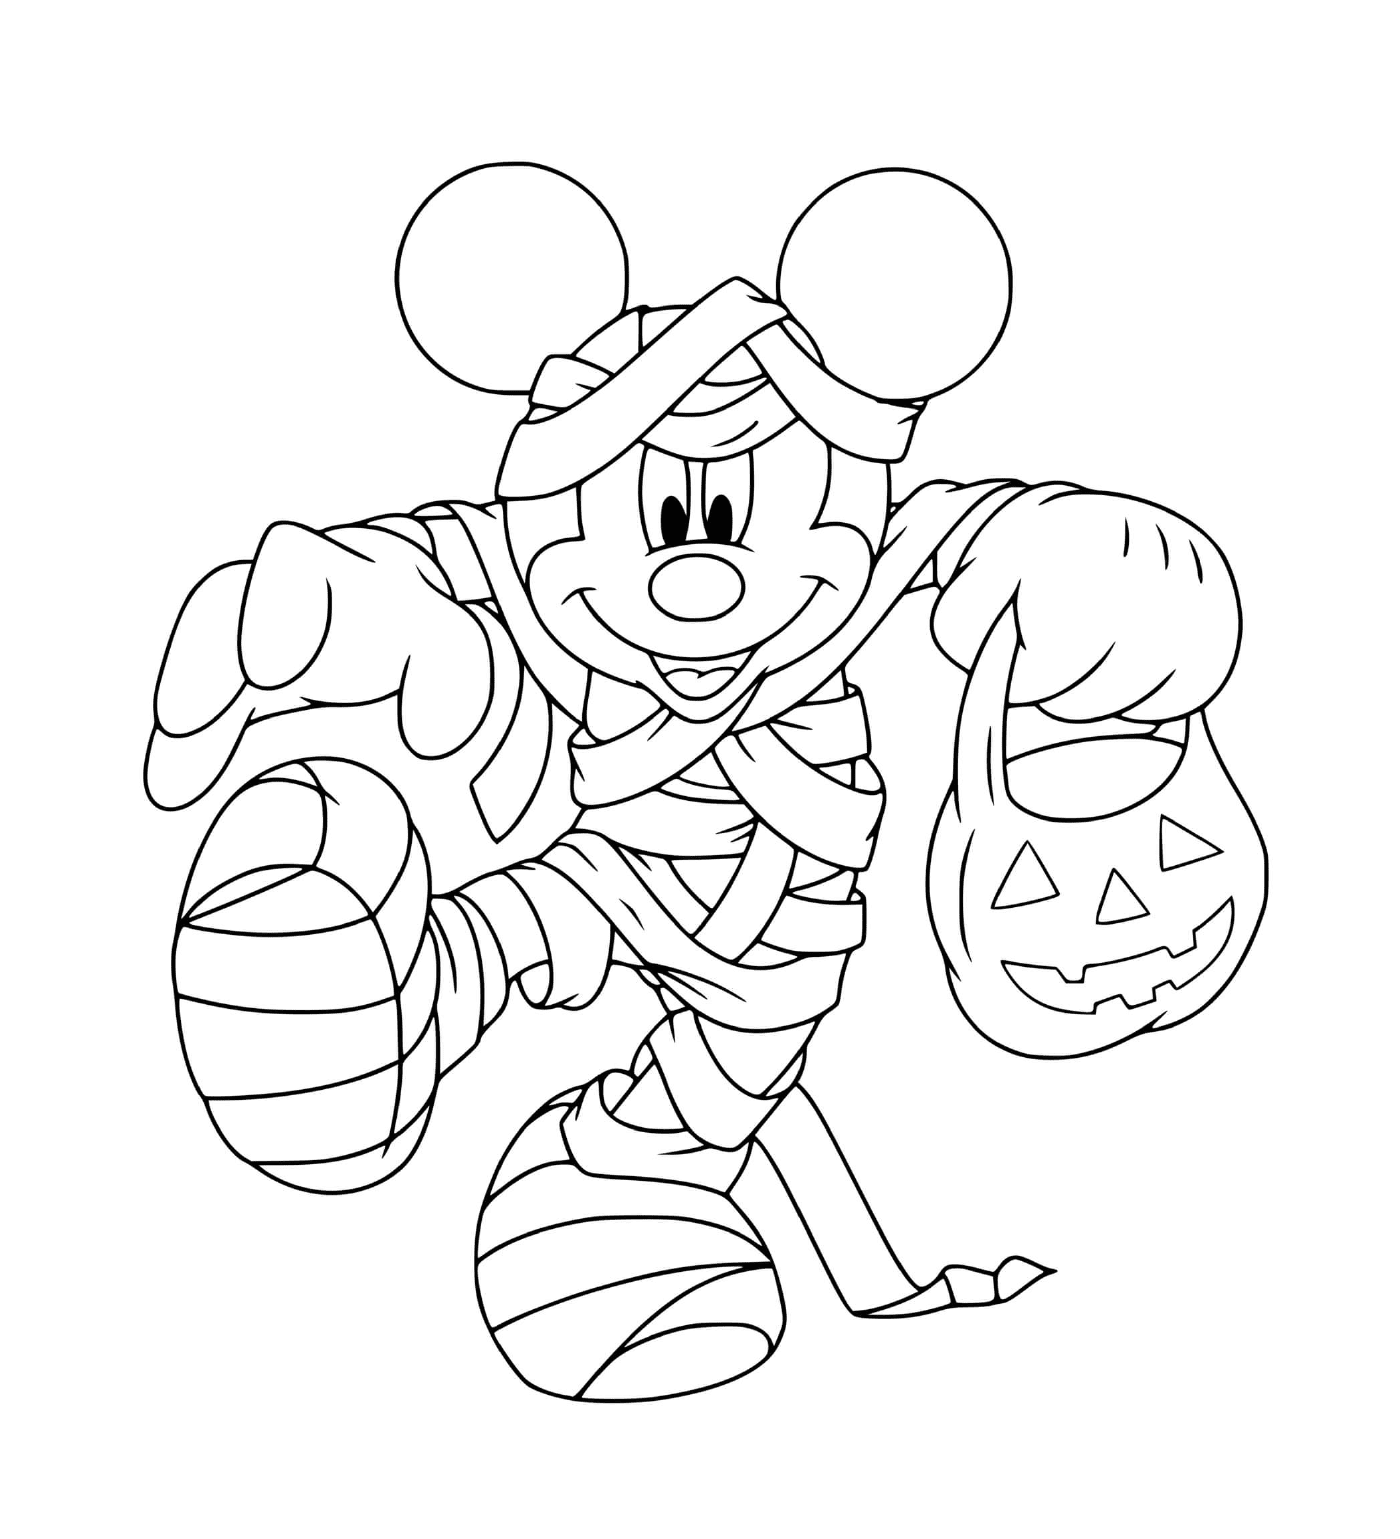   Mickey Mouse en costume effrayant 